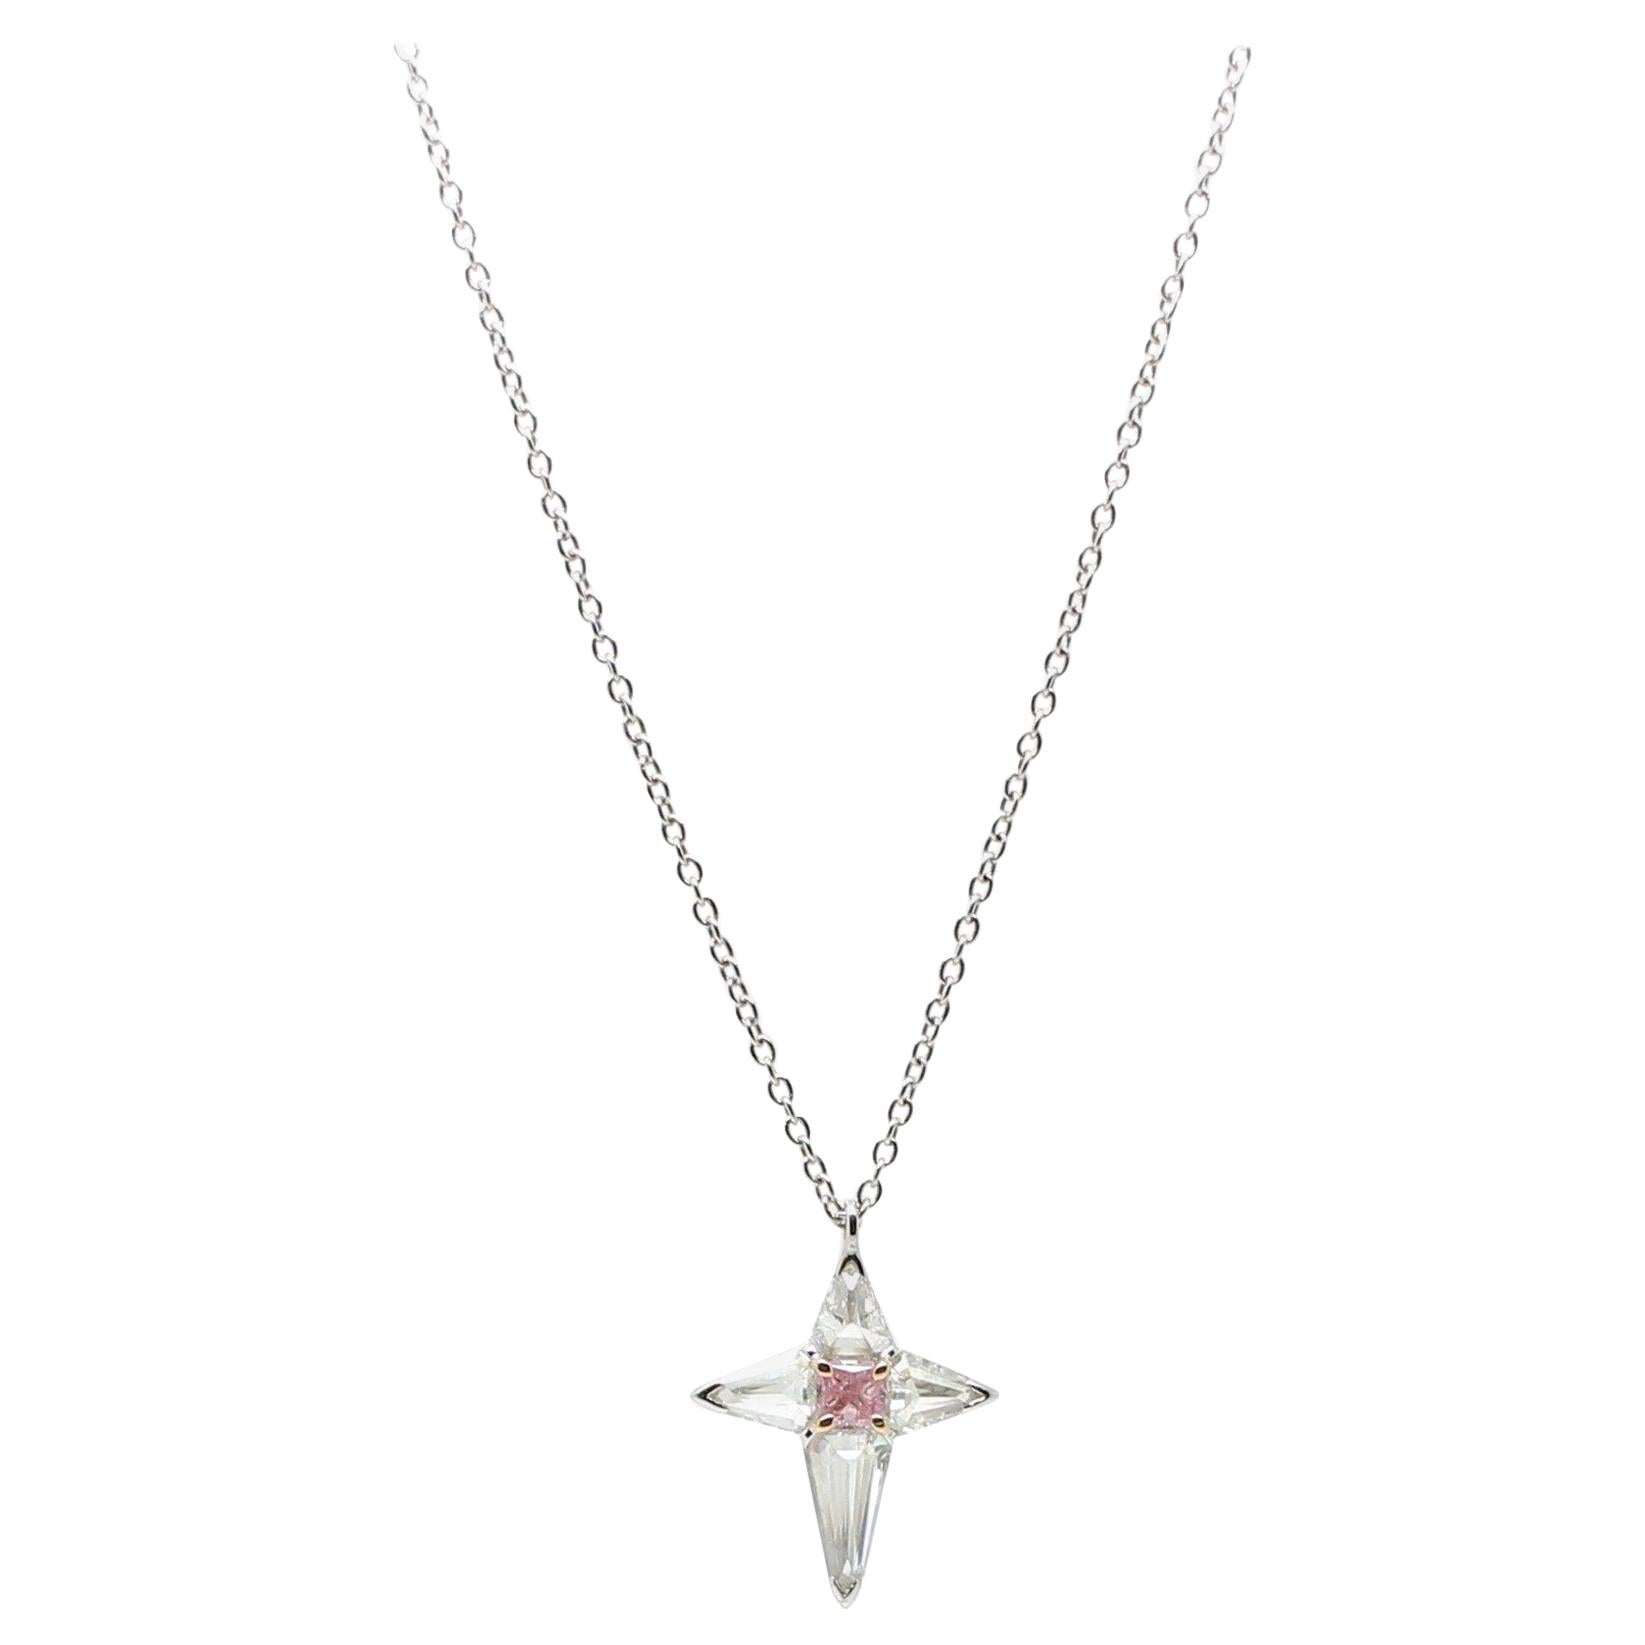 An elegant and sophisticated Cross Pendant Necklace composed by 1 Argyle Pink Natural Colour Radiant Diamond of 0.22 Carat in the centre,  and 4 White Kyte Cut Diamonds of 0.86 Carat to form the Cross. The White Kyte Diamonds are set upsidedown to